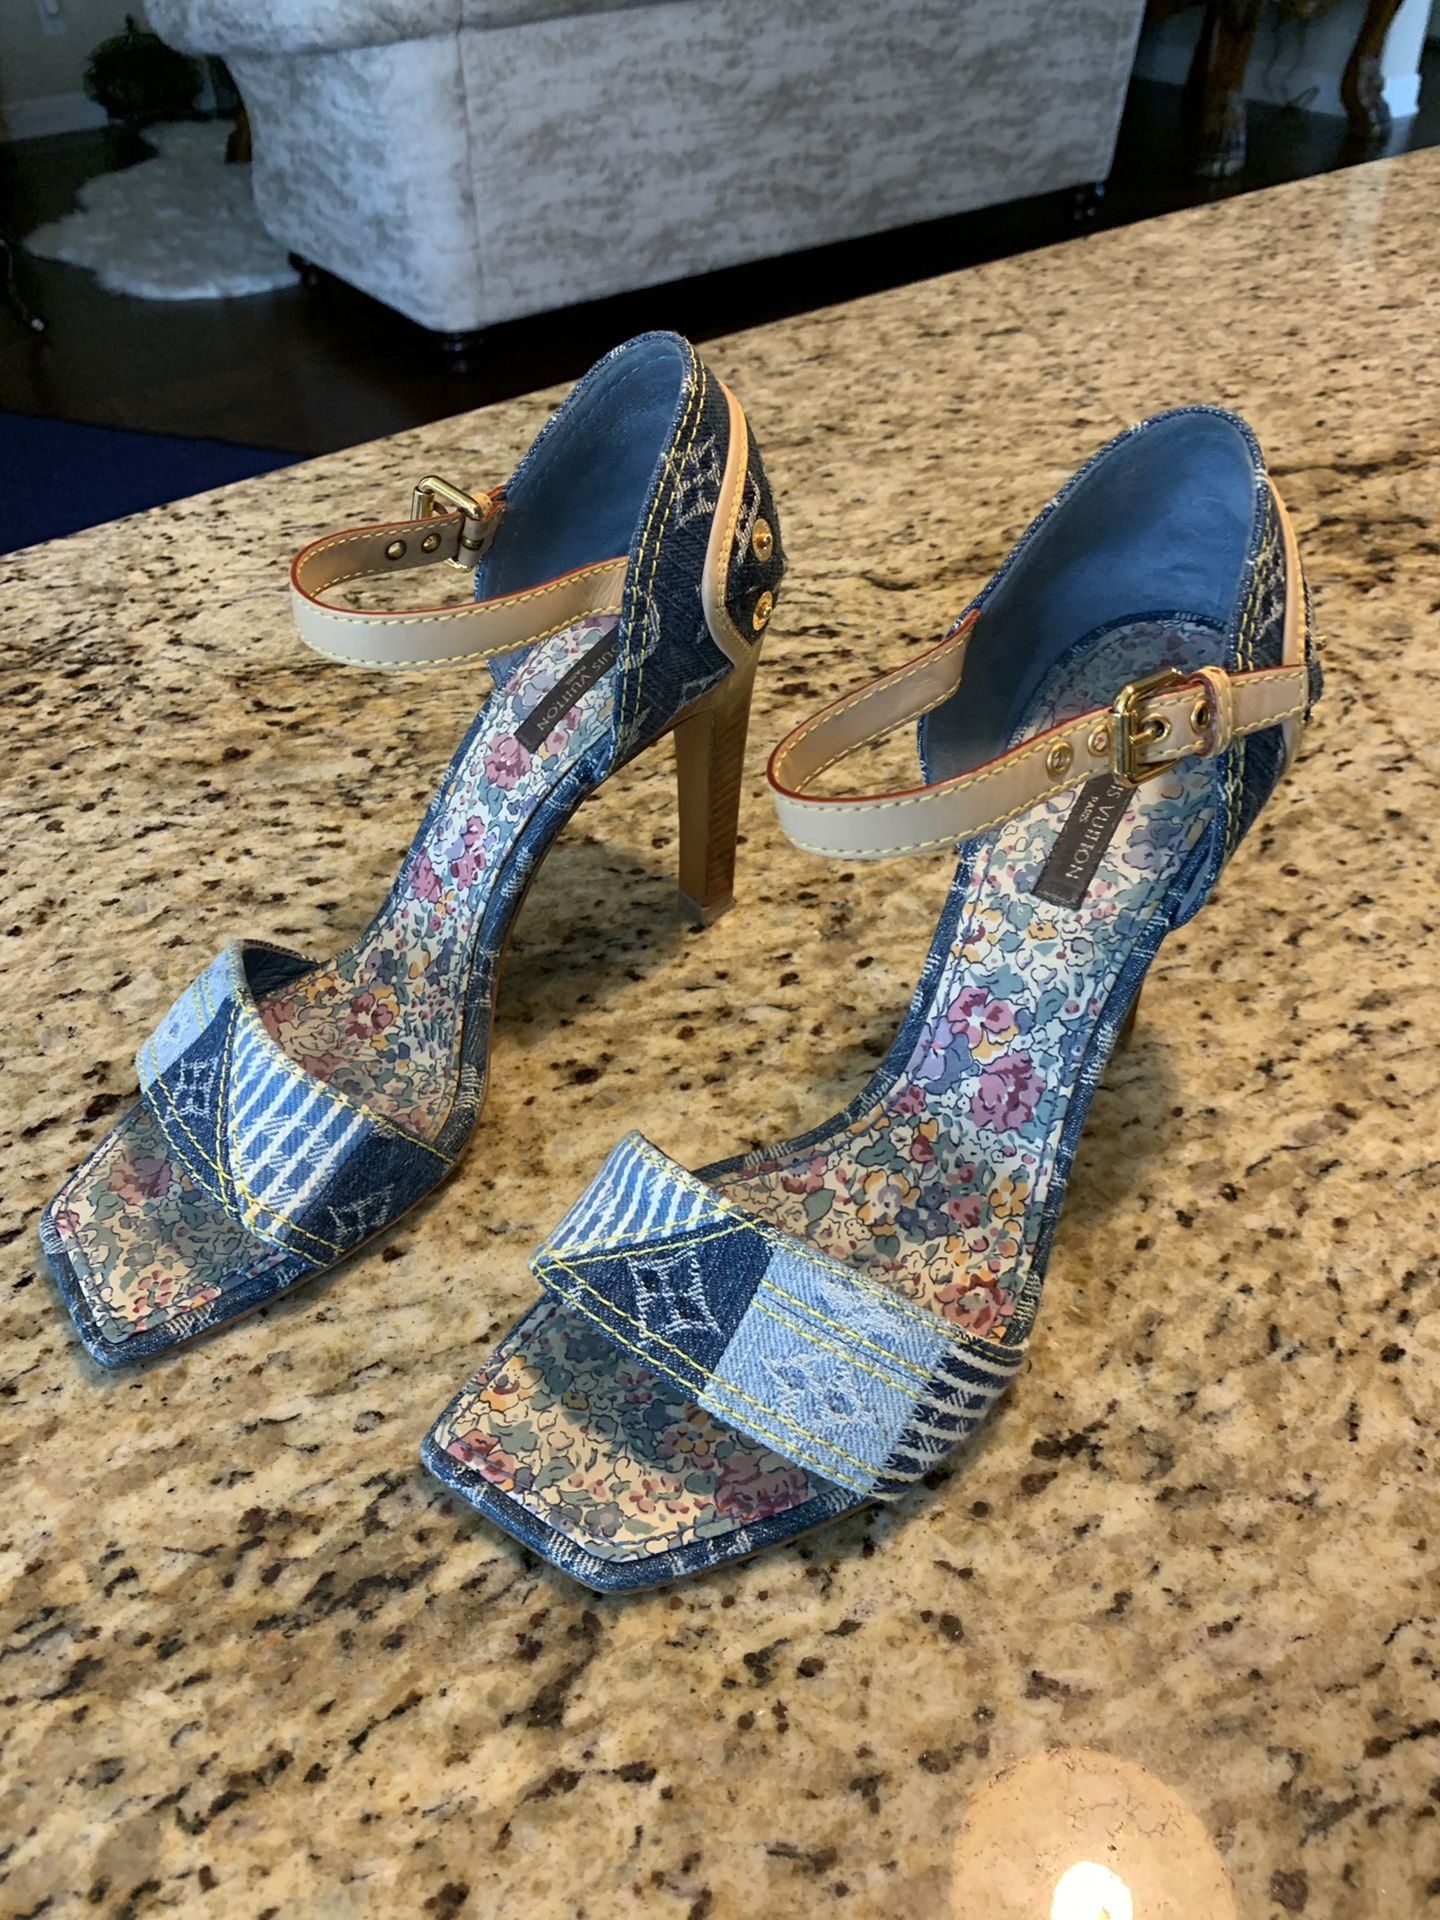 Louis Vuitton wedge sandals. for Sale in Fort Worth, TX - OfferUp